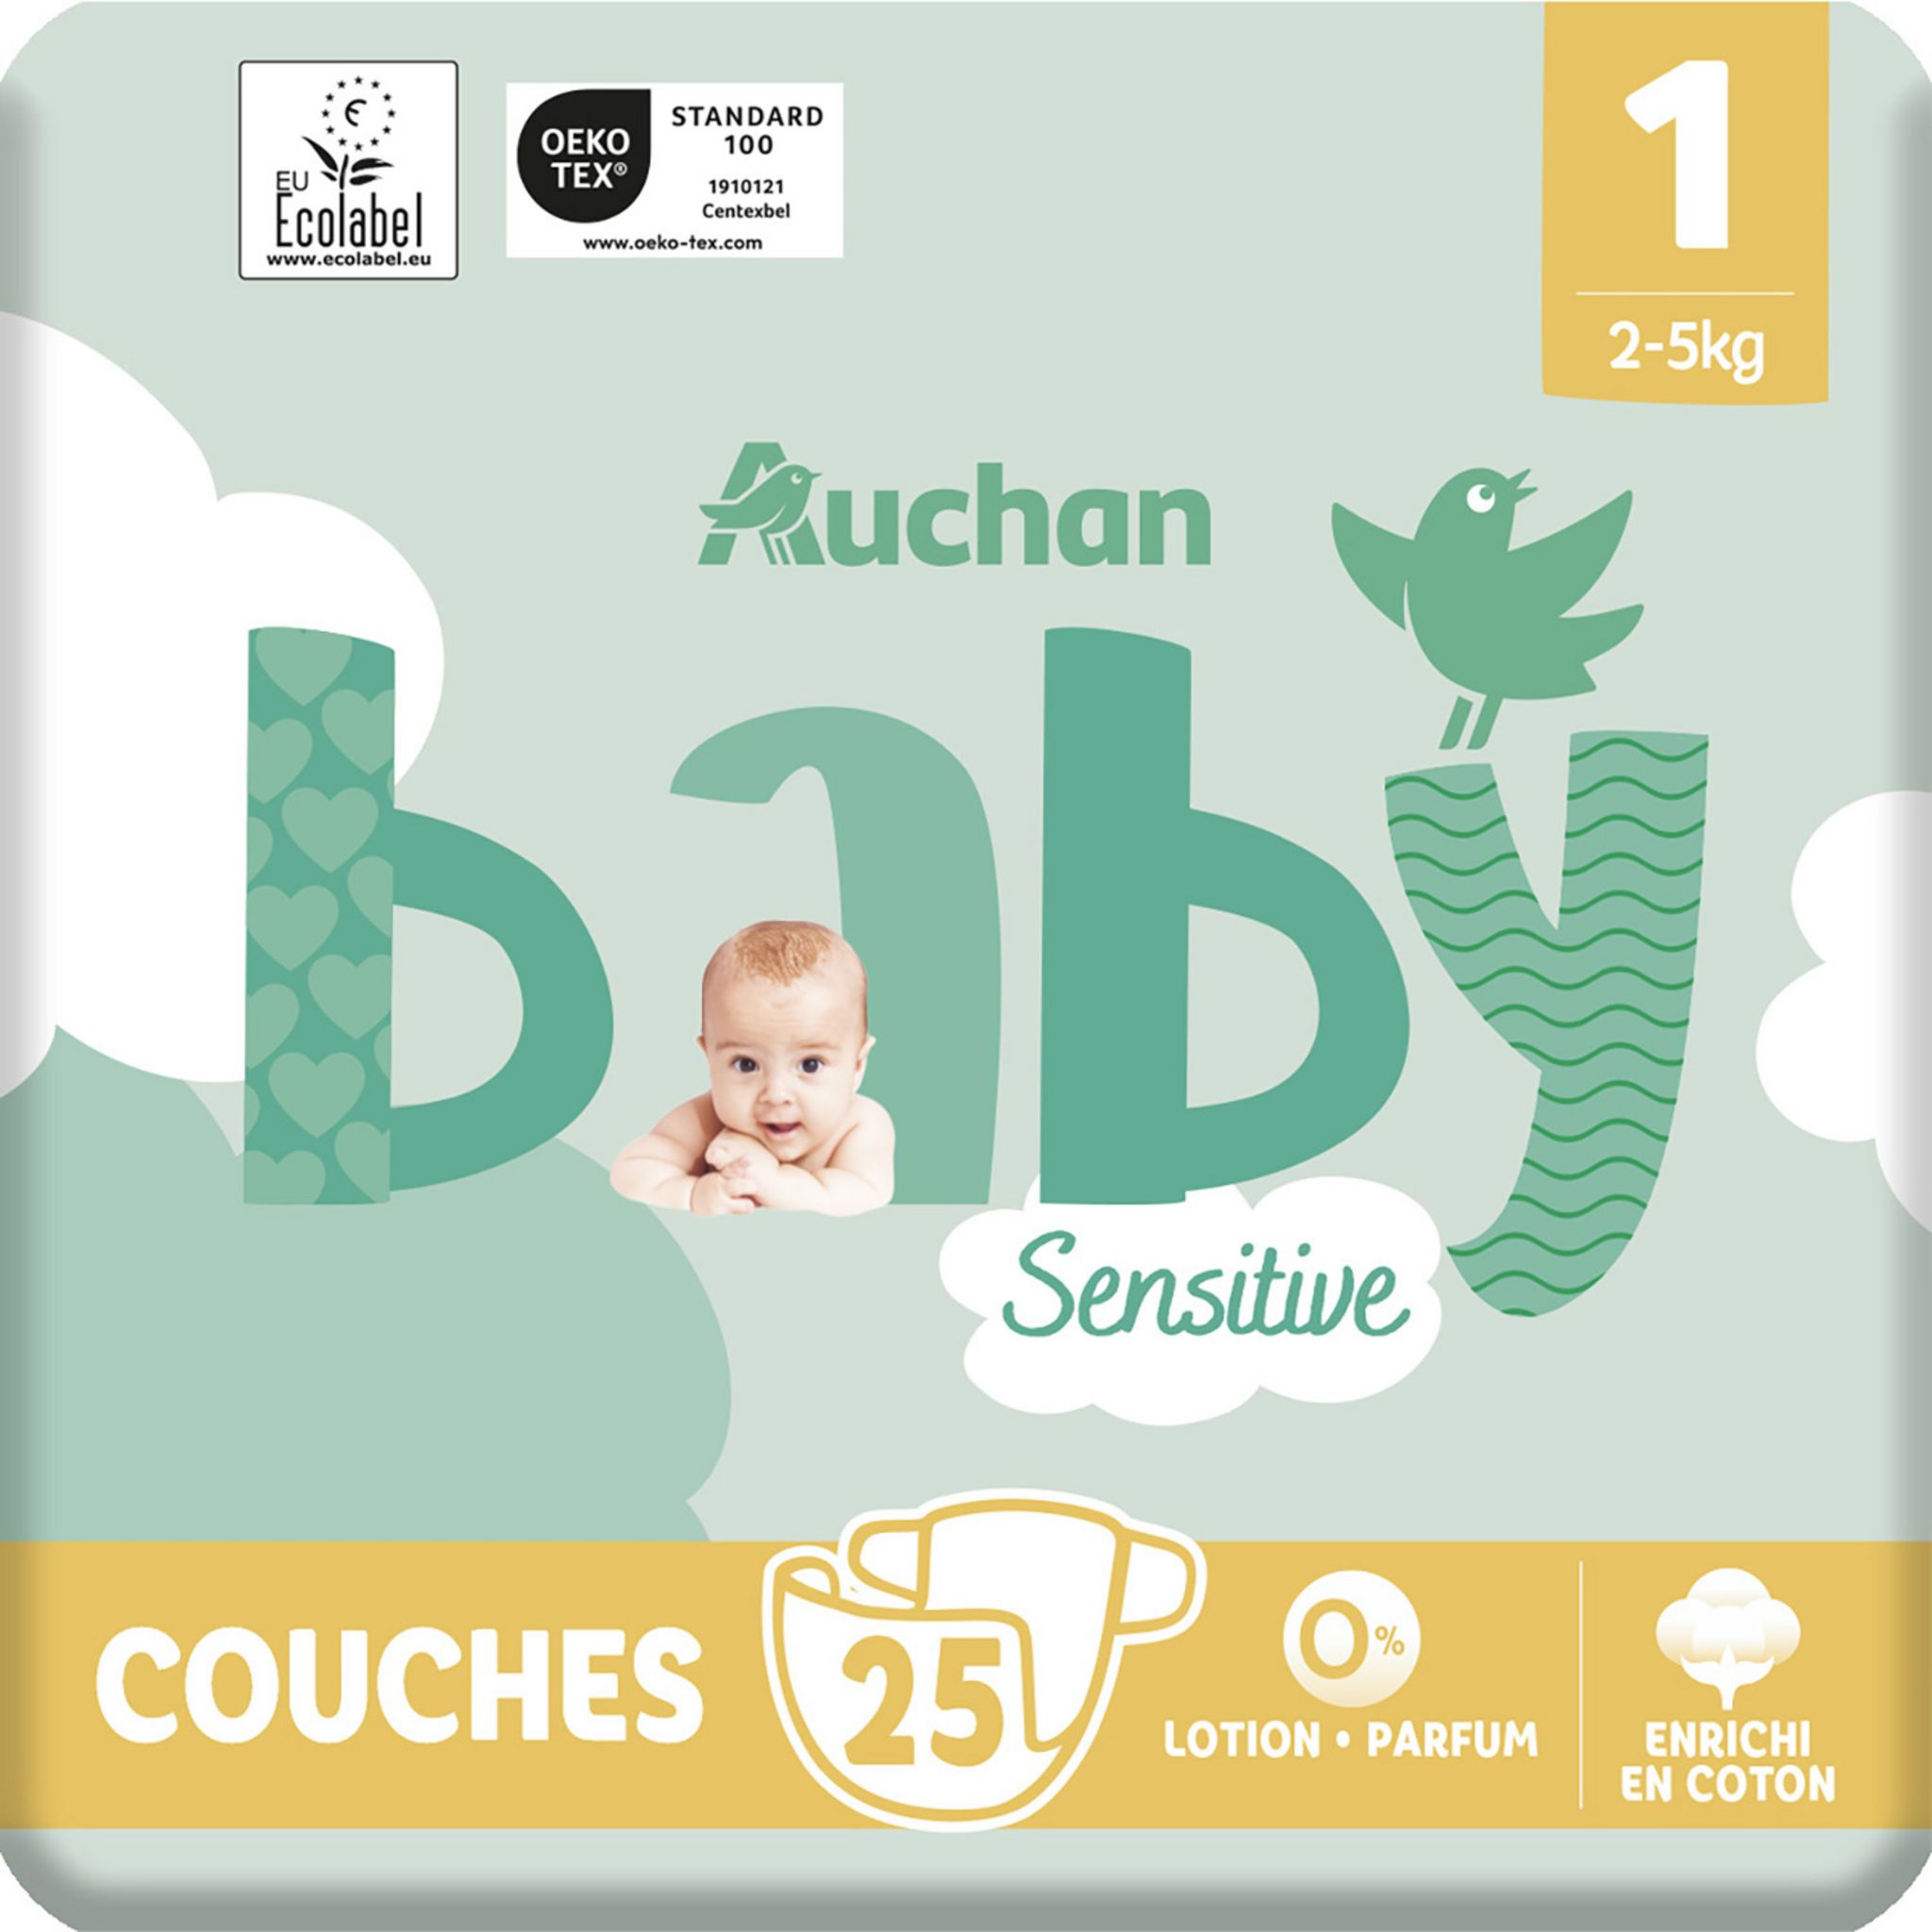 AUCHAN BABY Confort + couches taille 1 (2-5 kg) 22 couches pas cher 